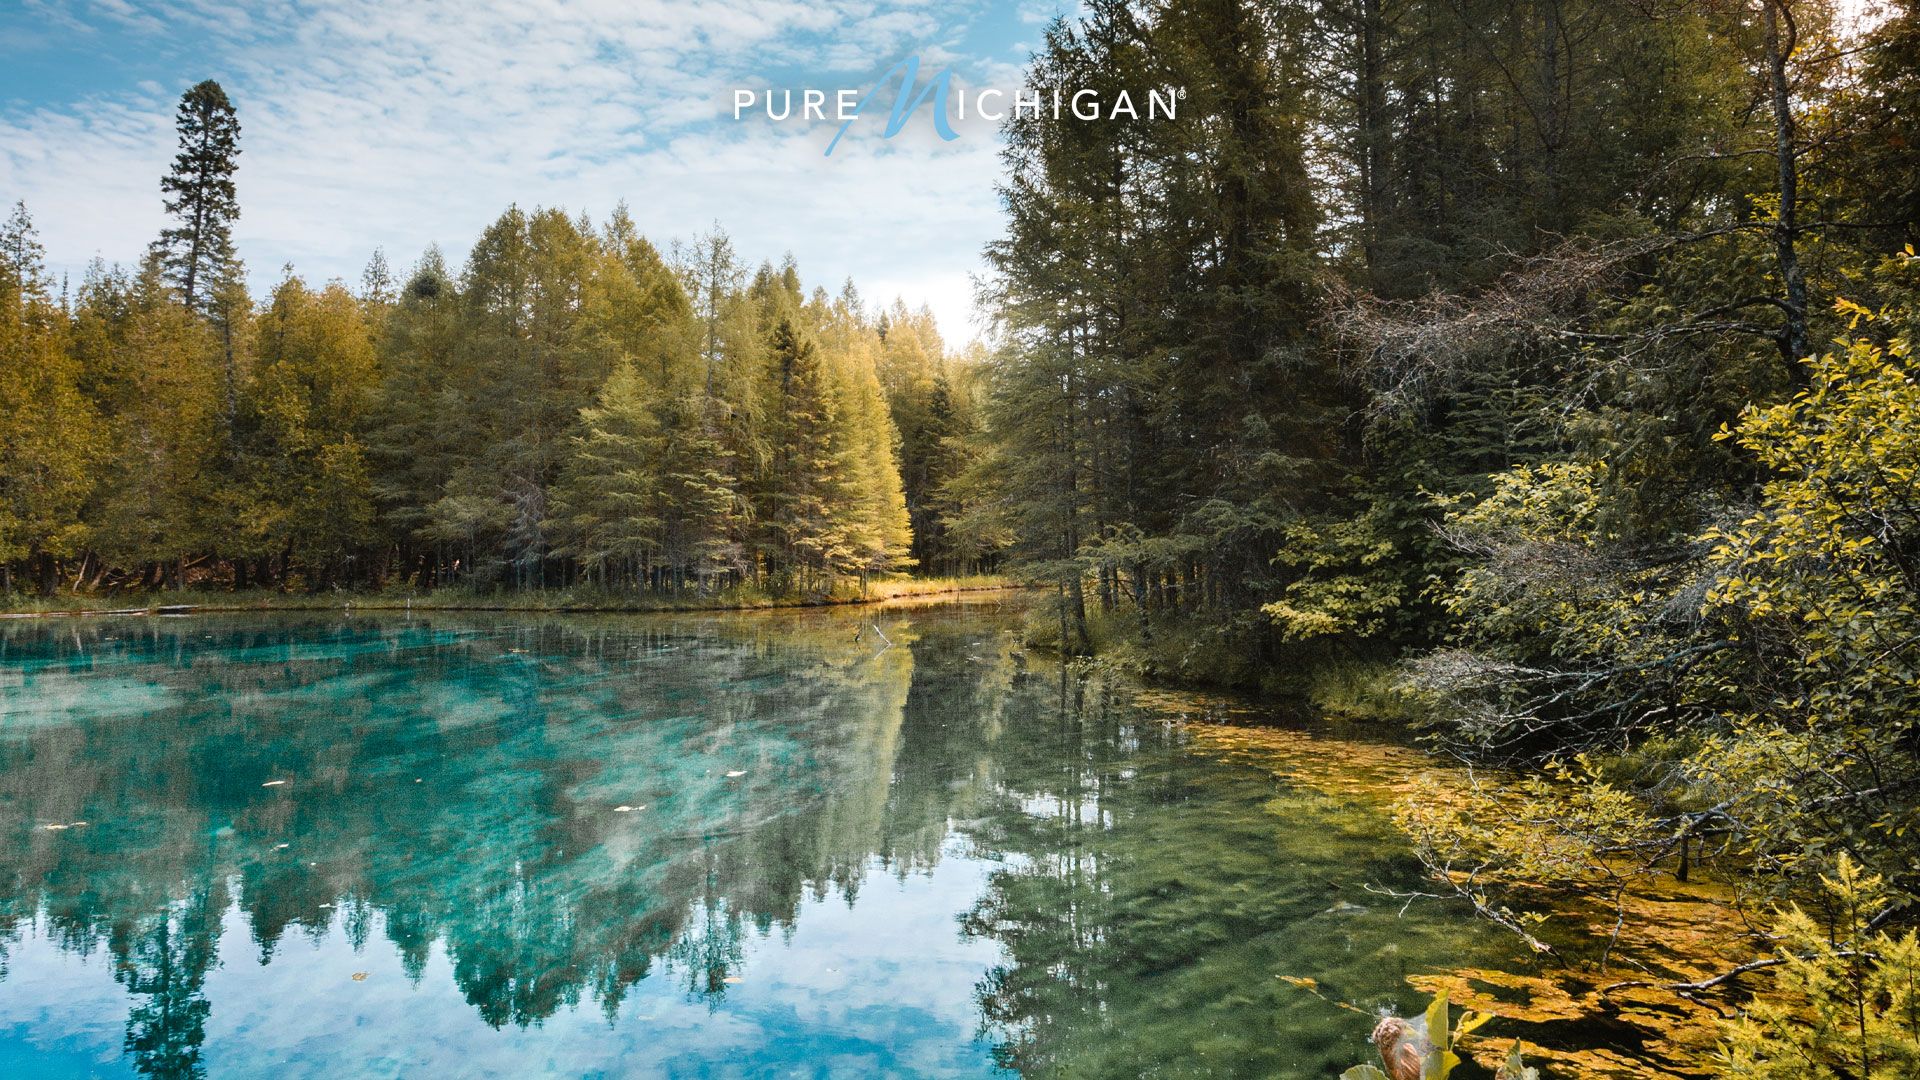 Try These Pure Michigan Background For Your Video Calls